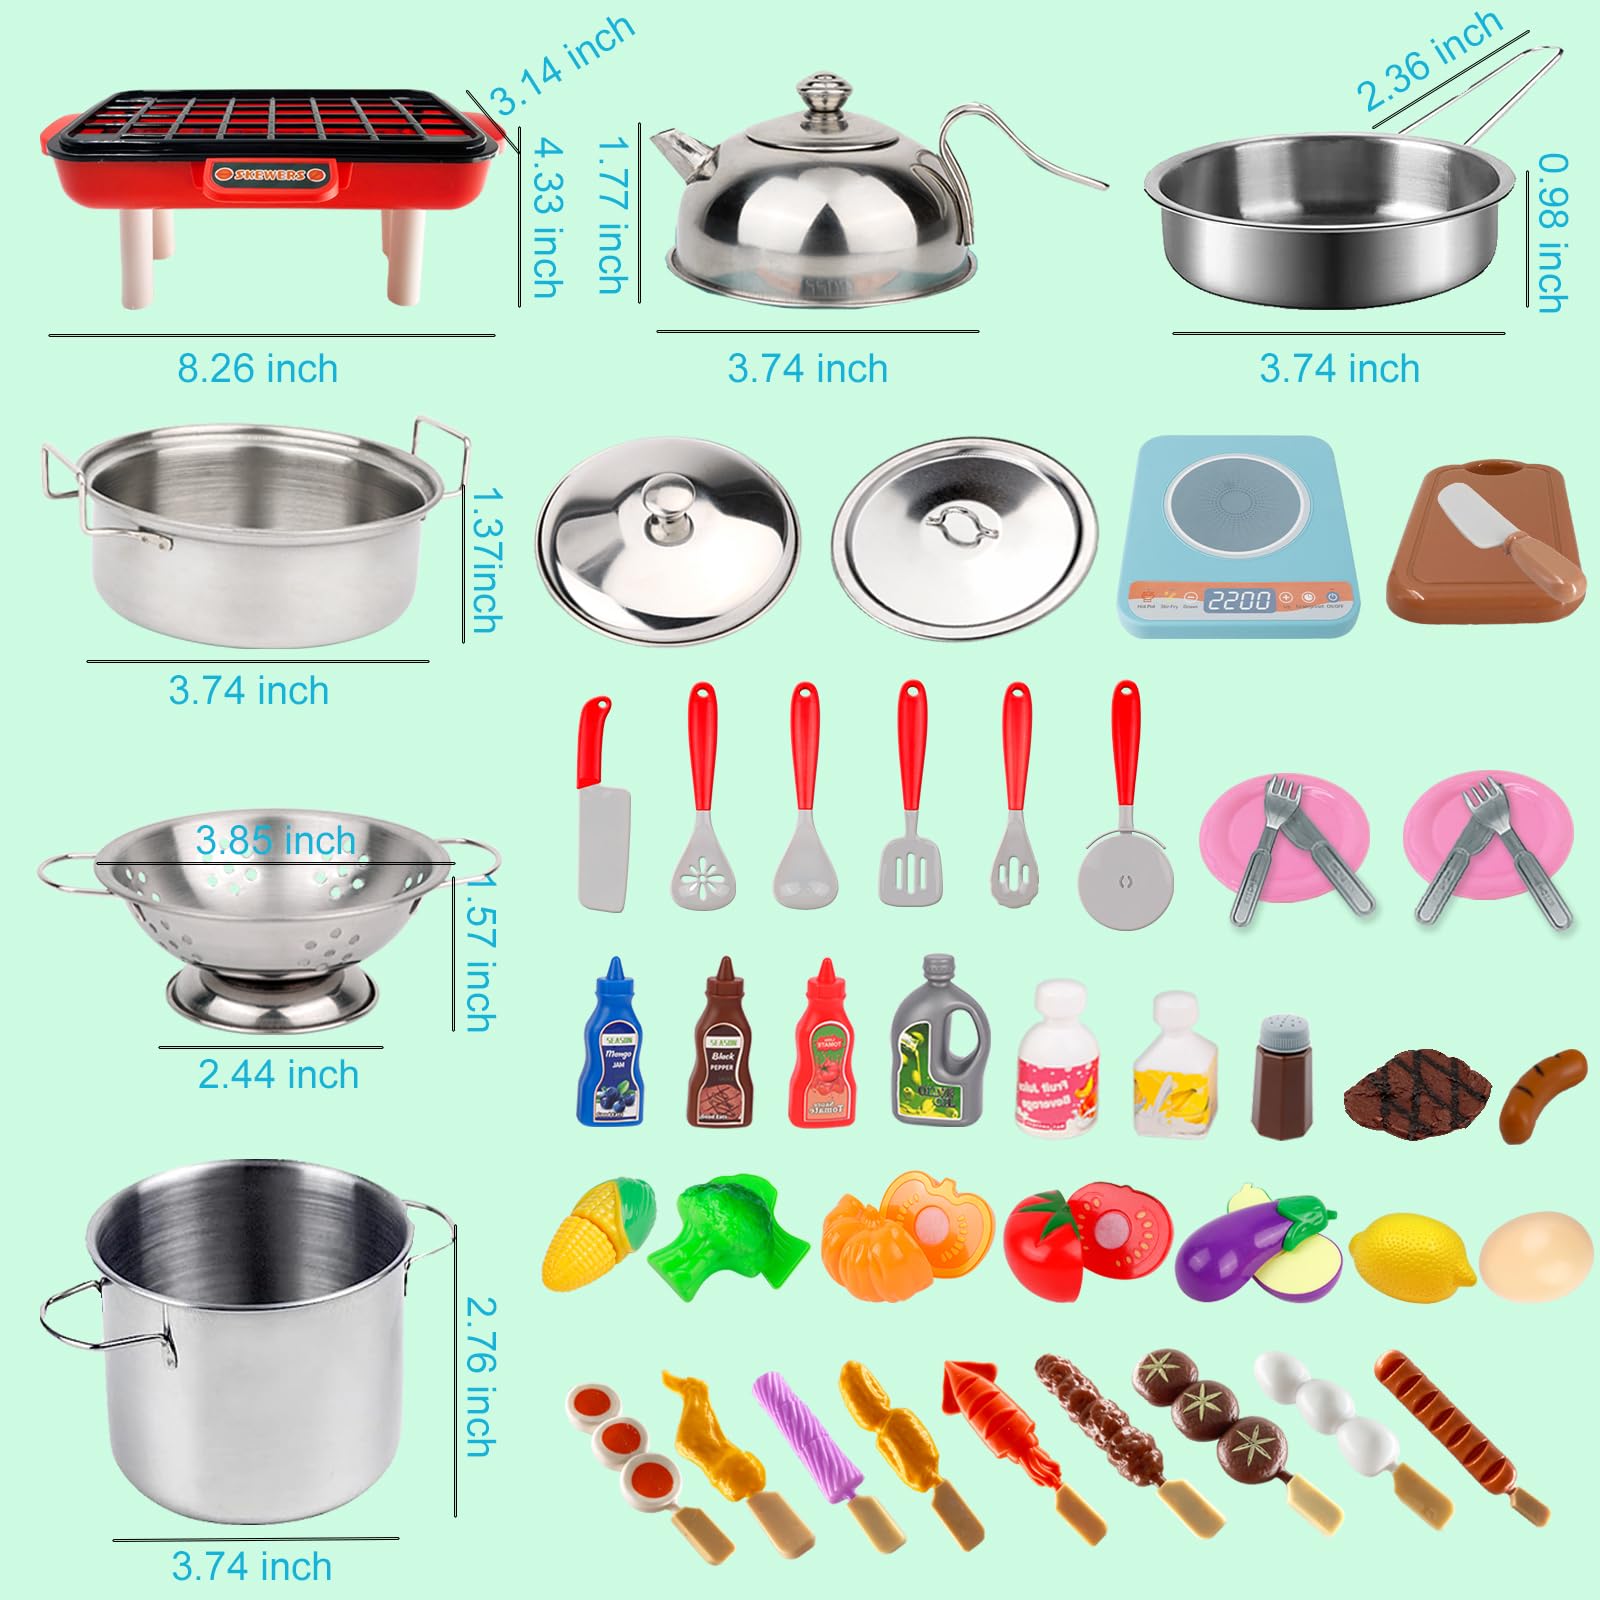 Holycco Play Kitchen Accessories, Kitchen Set for Kids with Play Pots and Pans, BBQ Camping Kitchen Playset, Pretend Kids Kitchen Accessories Toy Gifts for Girls, Grill Playset Toys for Boys Girls